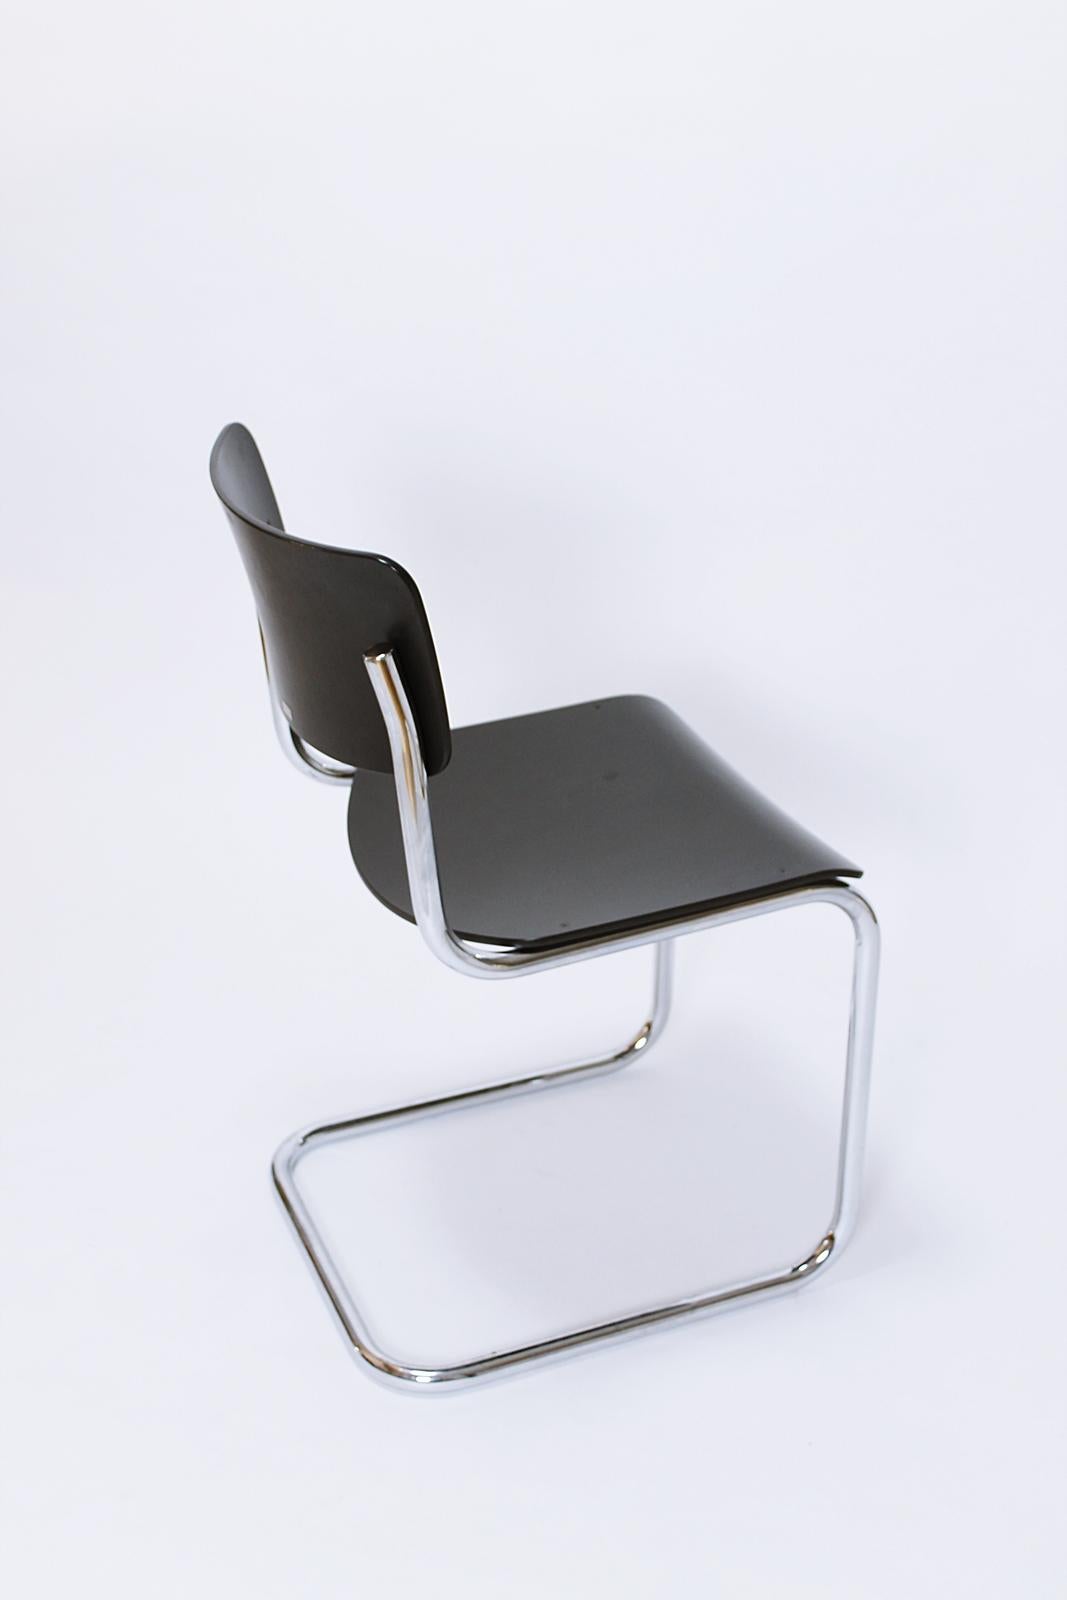 Bauhaus Classic S43 Cantilevered Chair by Mart Stam for Thonet, Germany For Sale 1